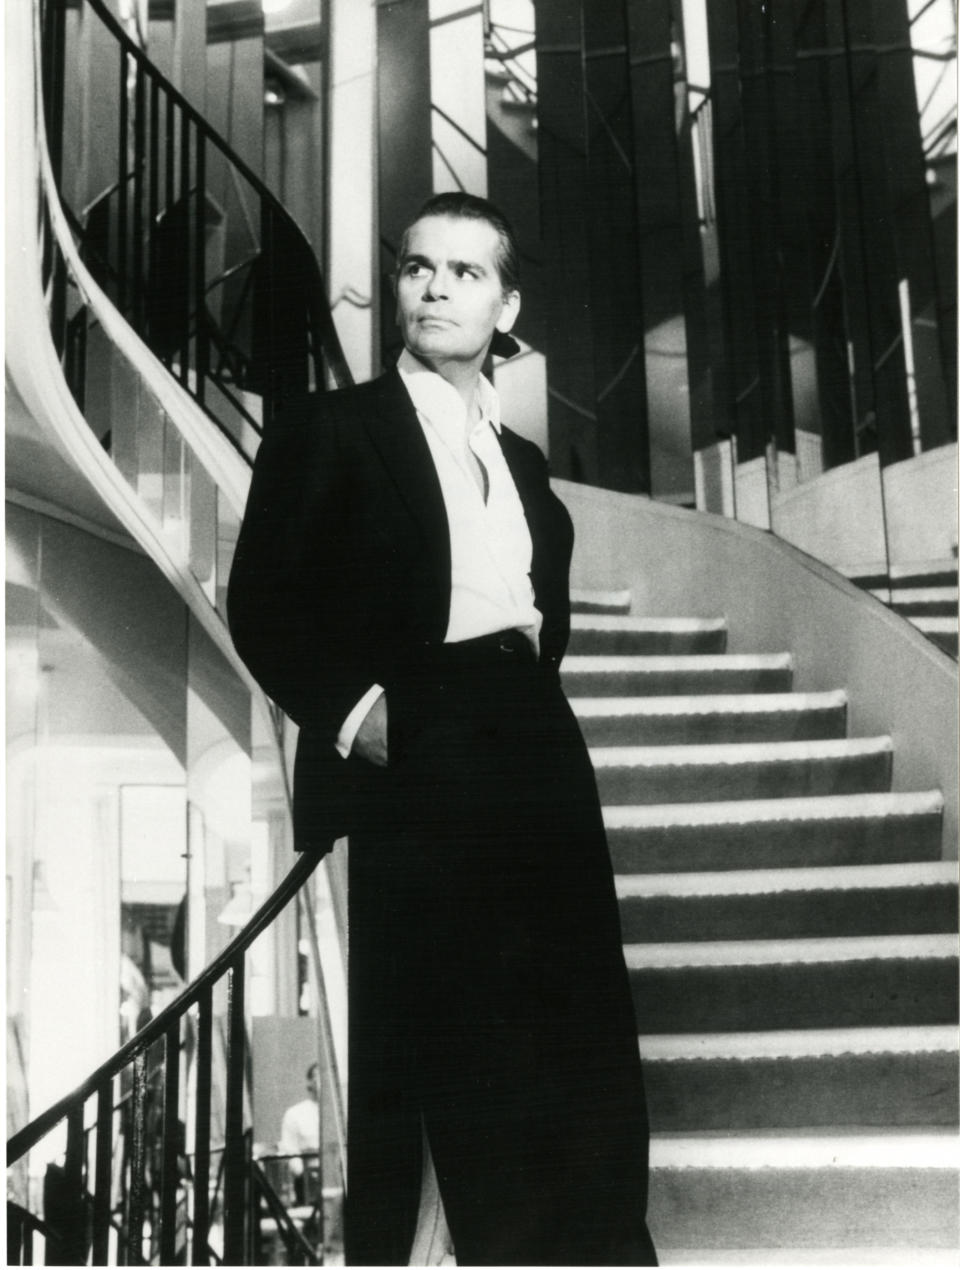 Karl Lagerfeld photographed by Helmut Newton on the mirrored staircase at 31 Rue Cambon.